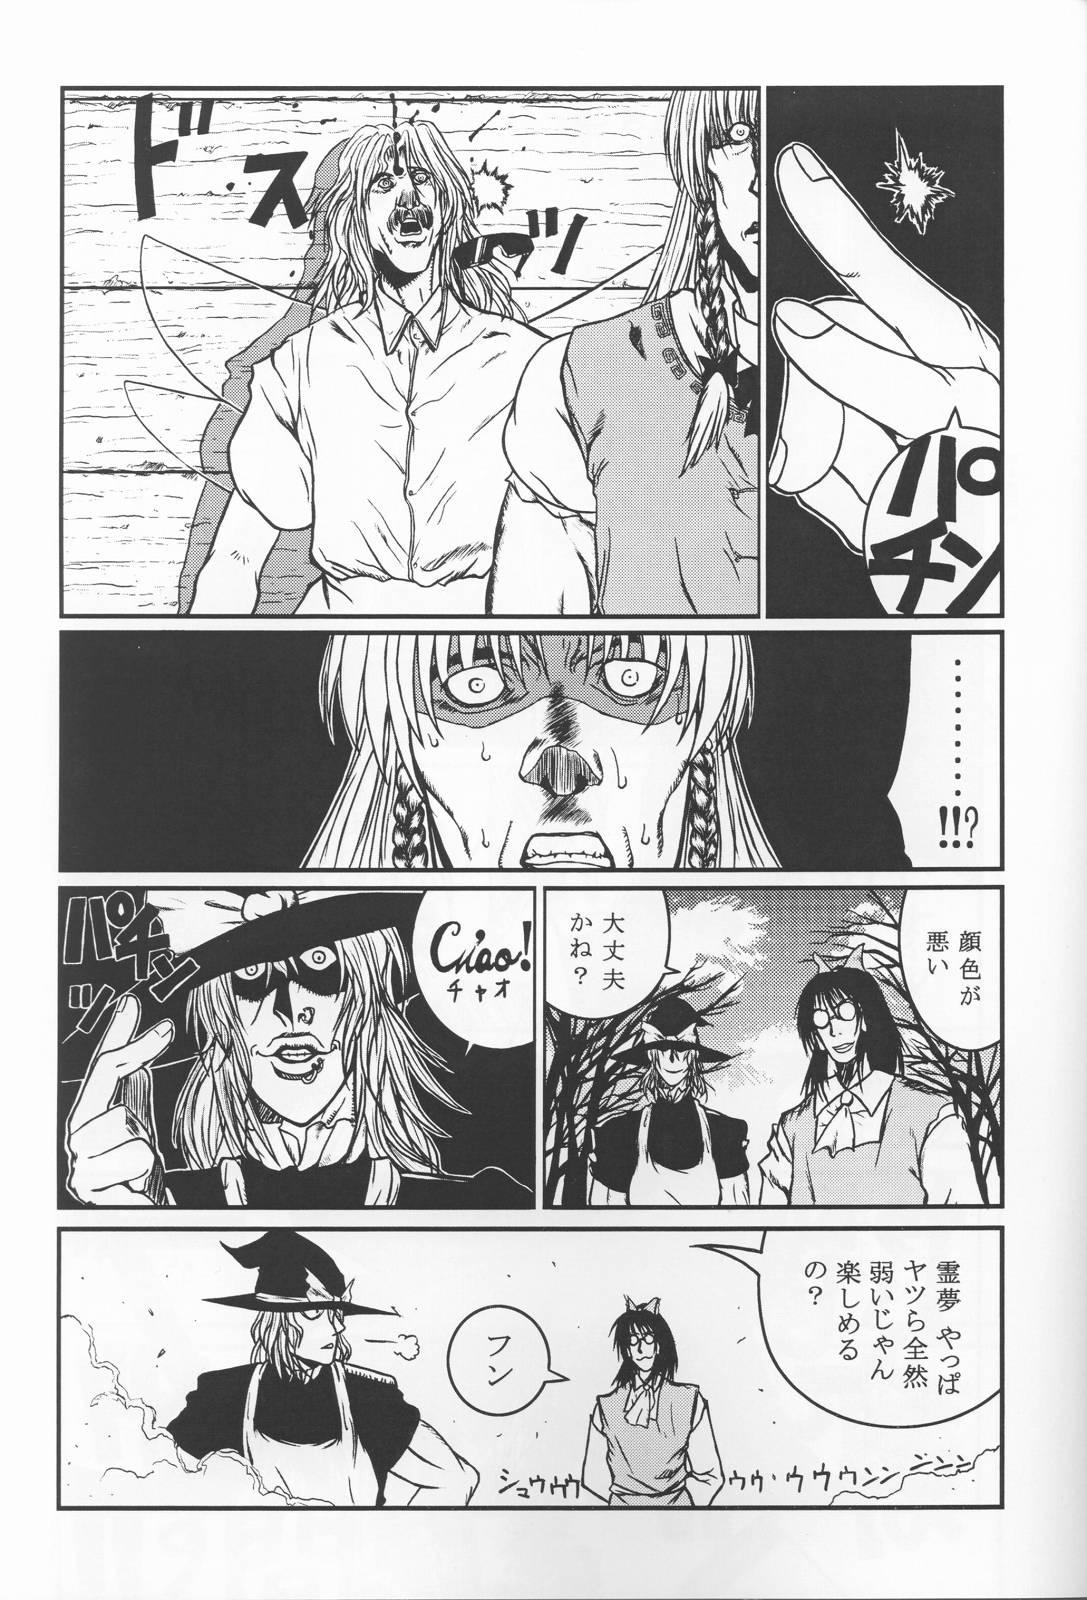 Cut HELLSING？ - Touhou project Shemales - Page 8